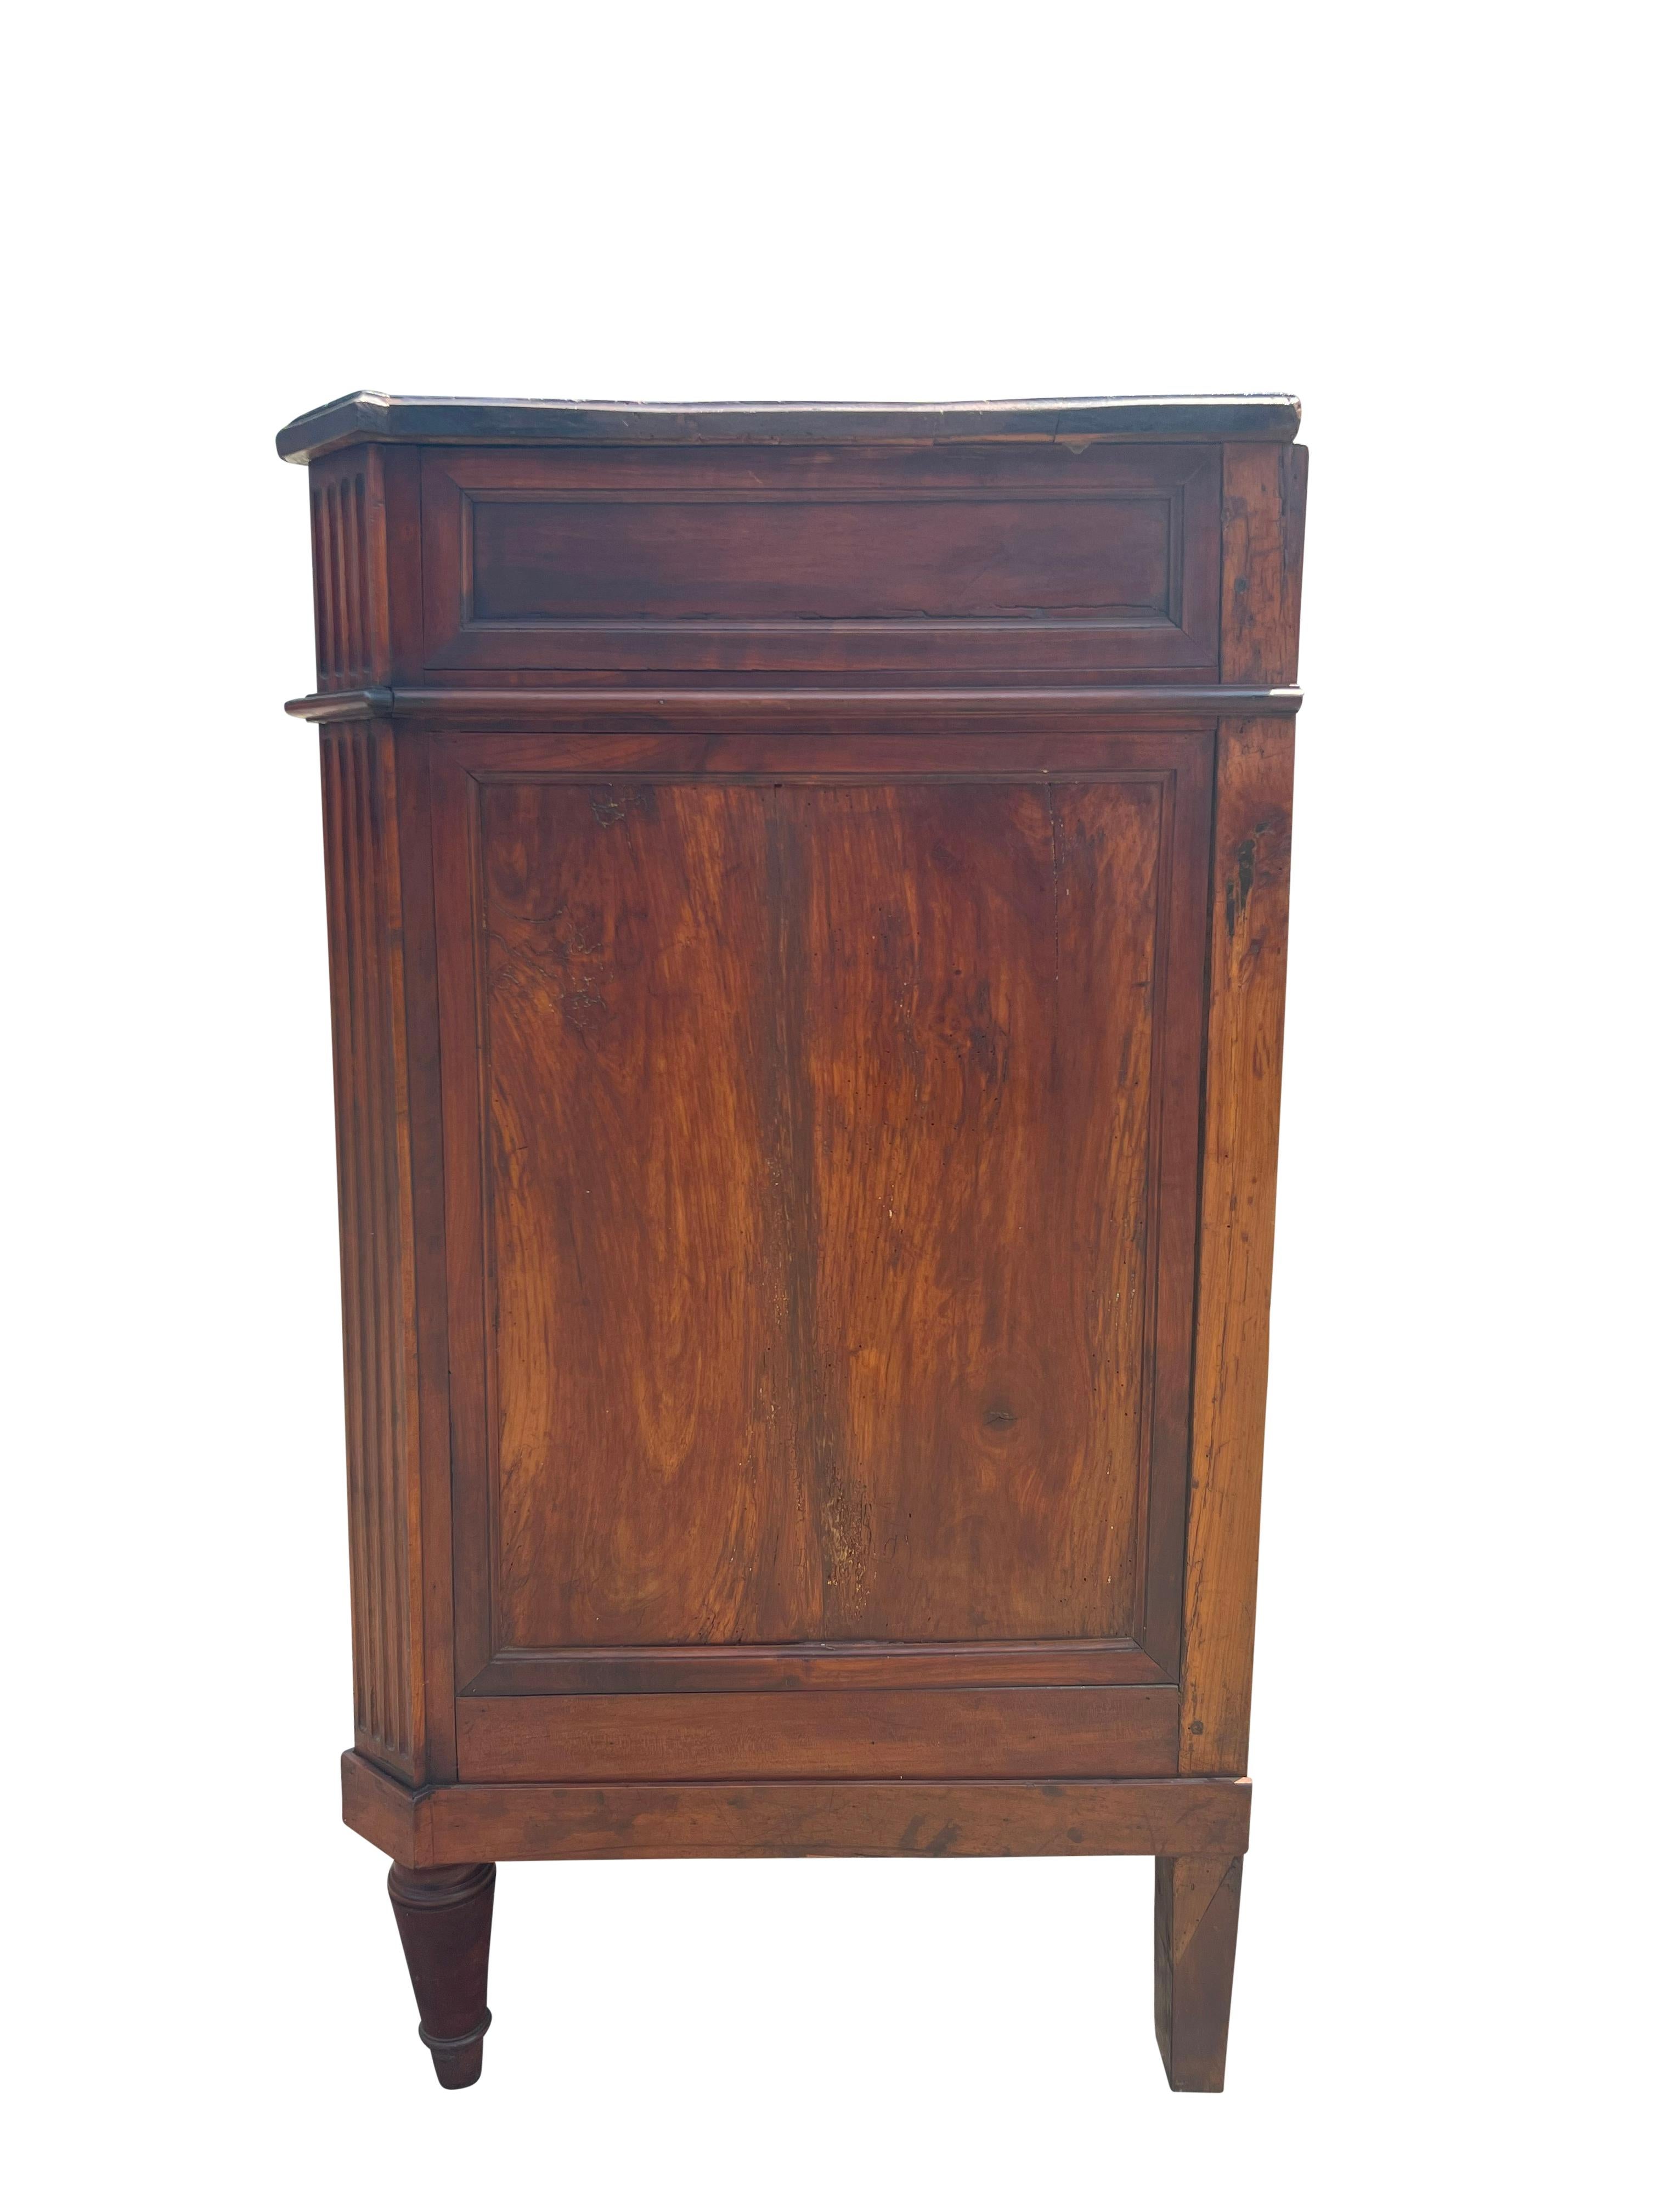 Early 19th Century Directoire Provincial Fruitwood Buffet